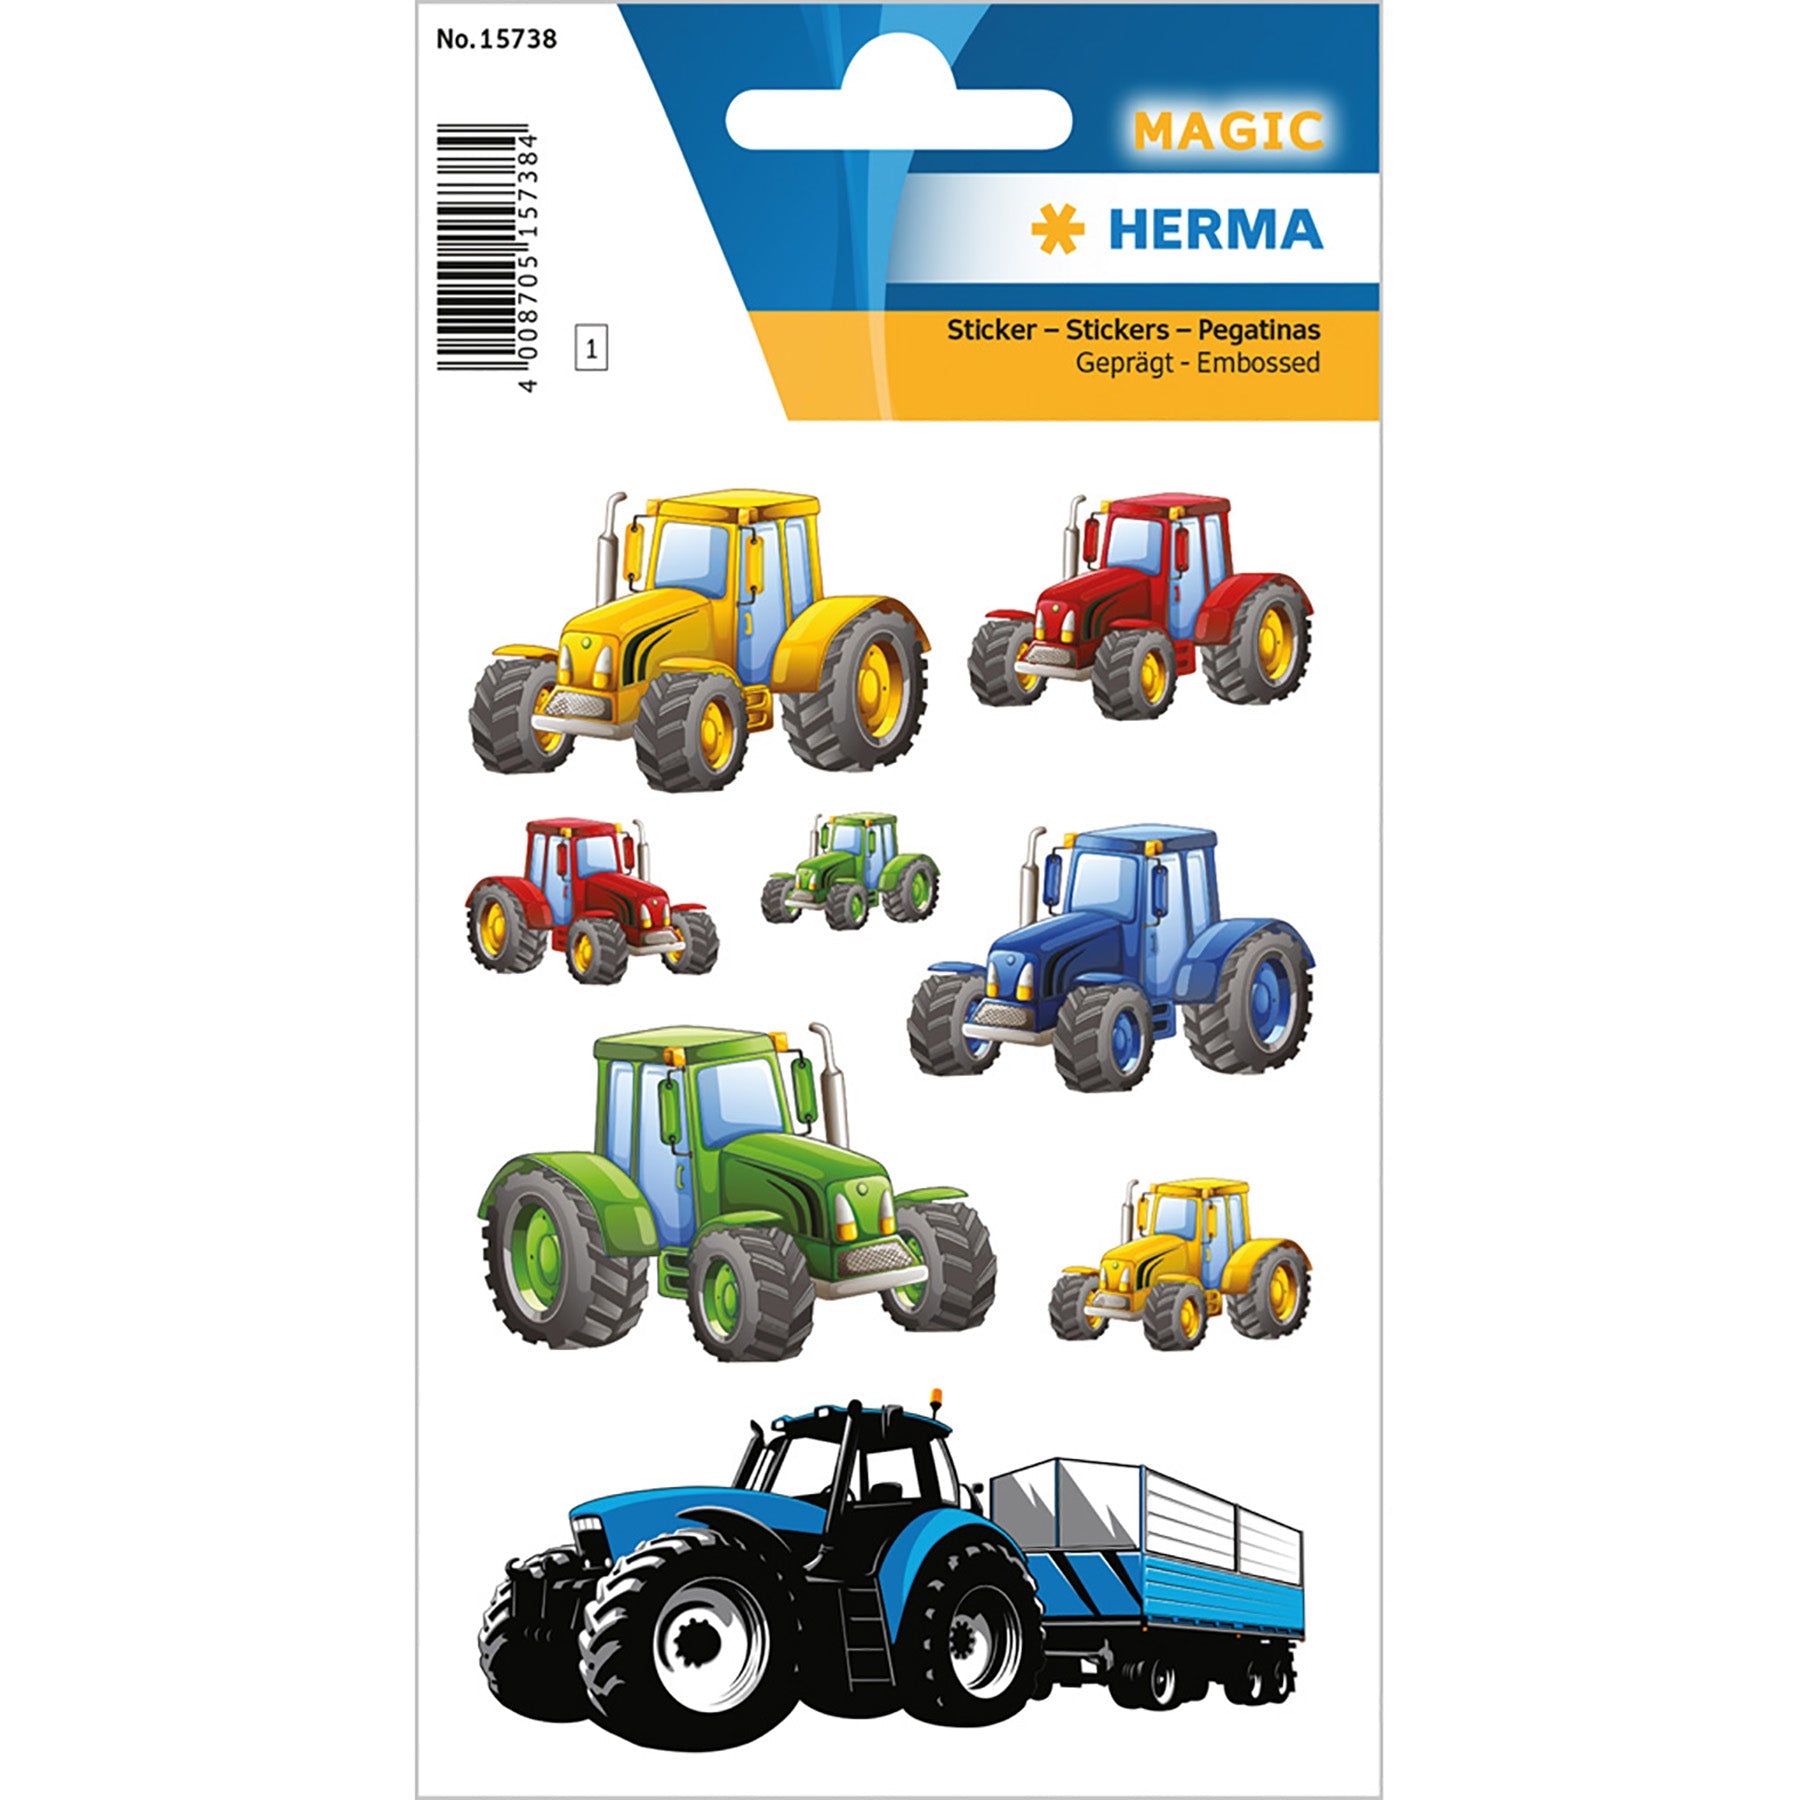 Herma Magic Stickers Tractor Race Embossed 4.75x3.1in Sheet